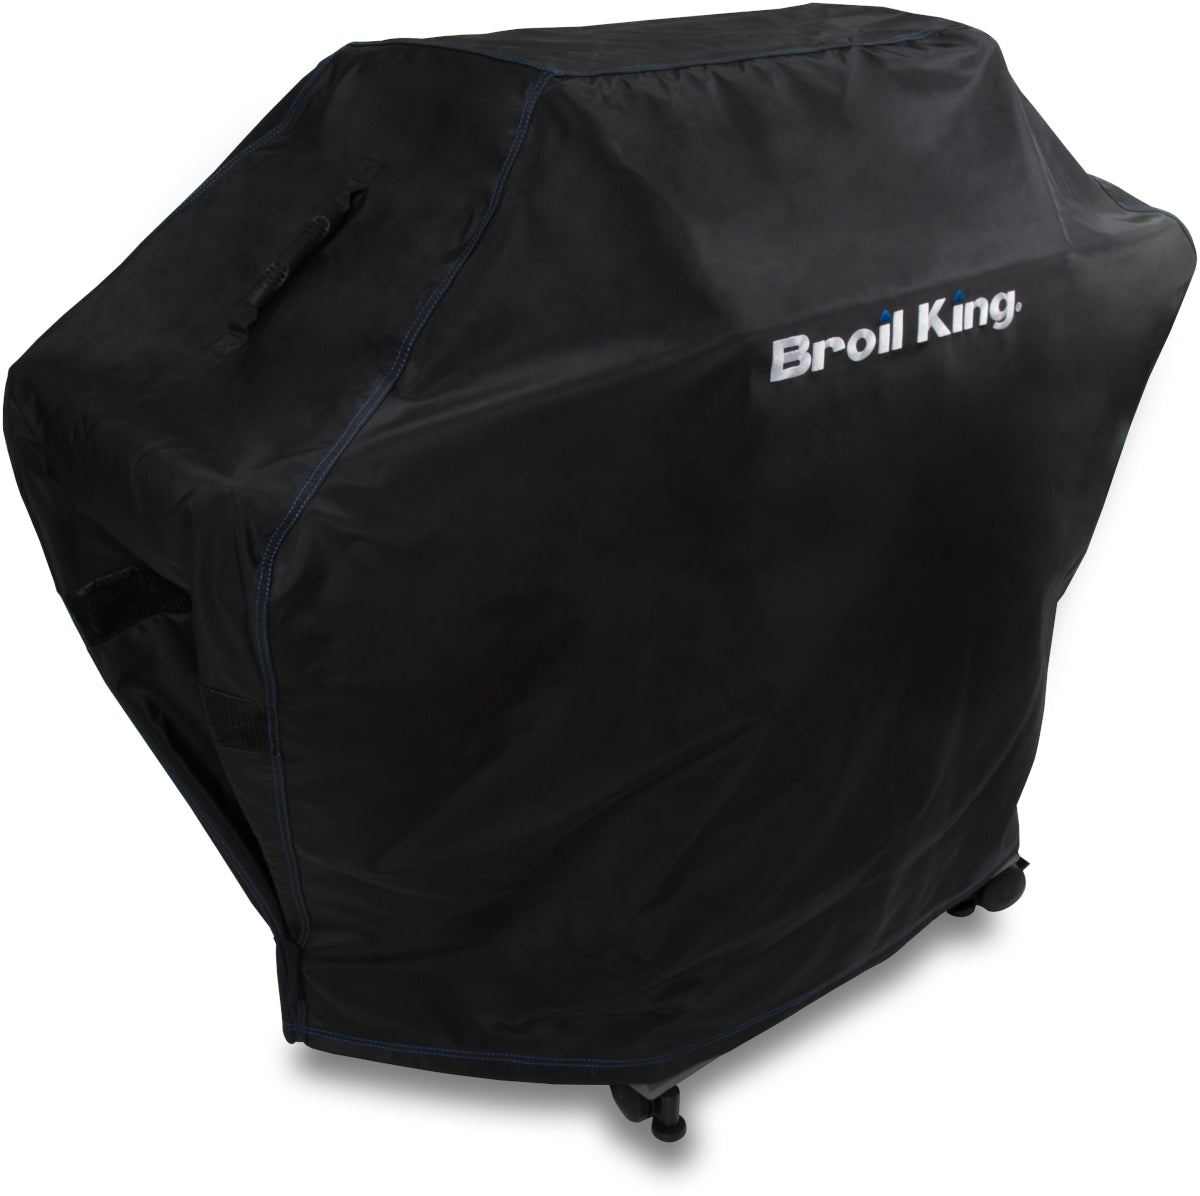 Broil King Premium Cover - Fits Baron 440/490, Signet 300 series, Crown 400's, CART 400's